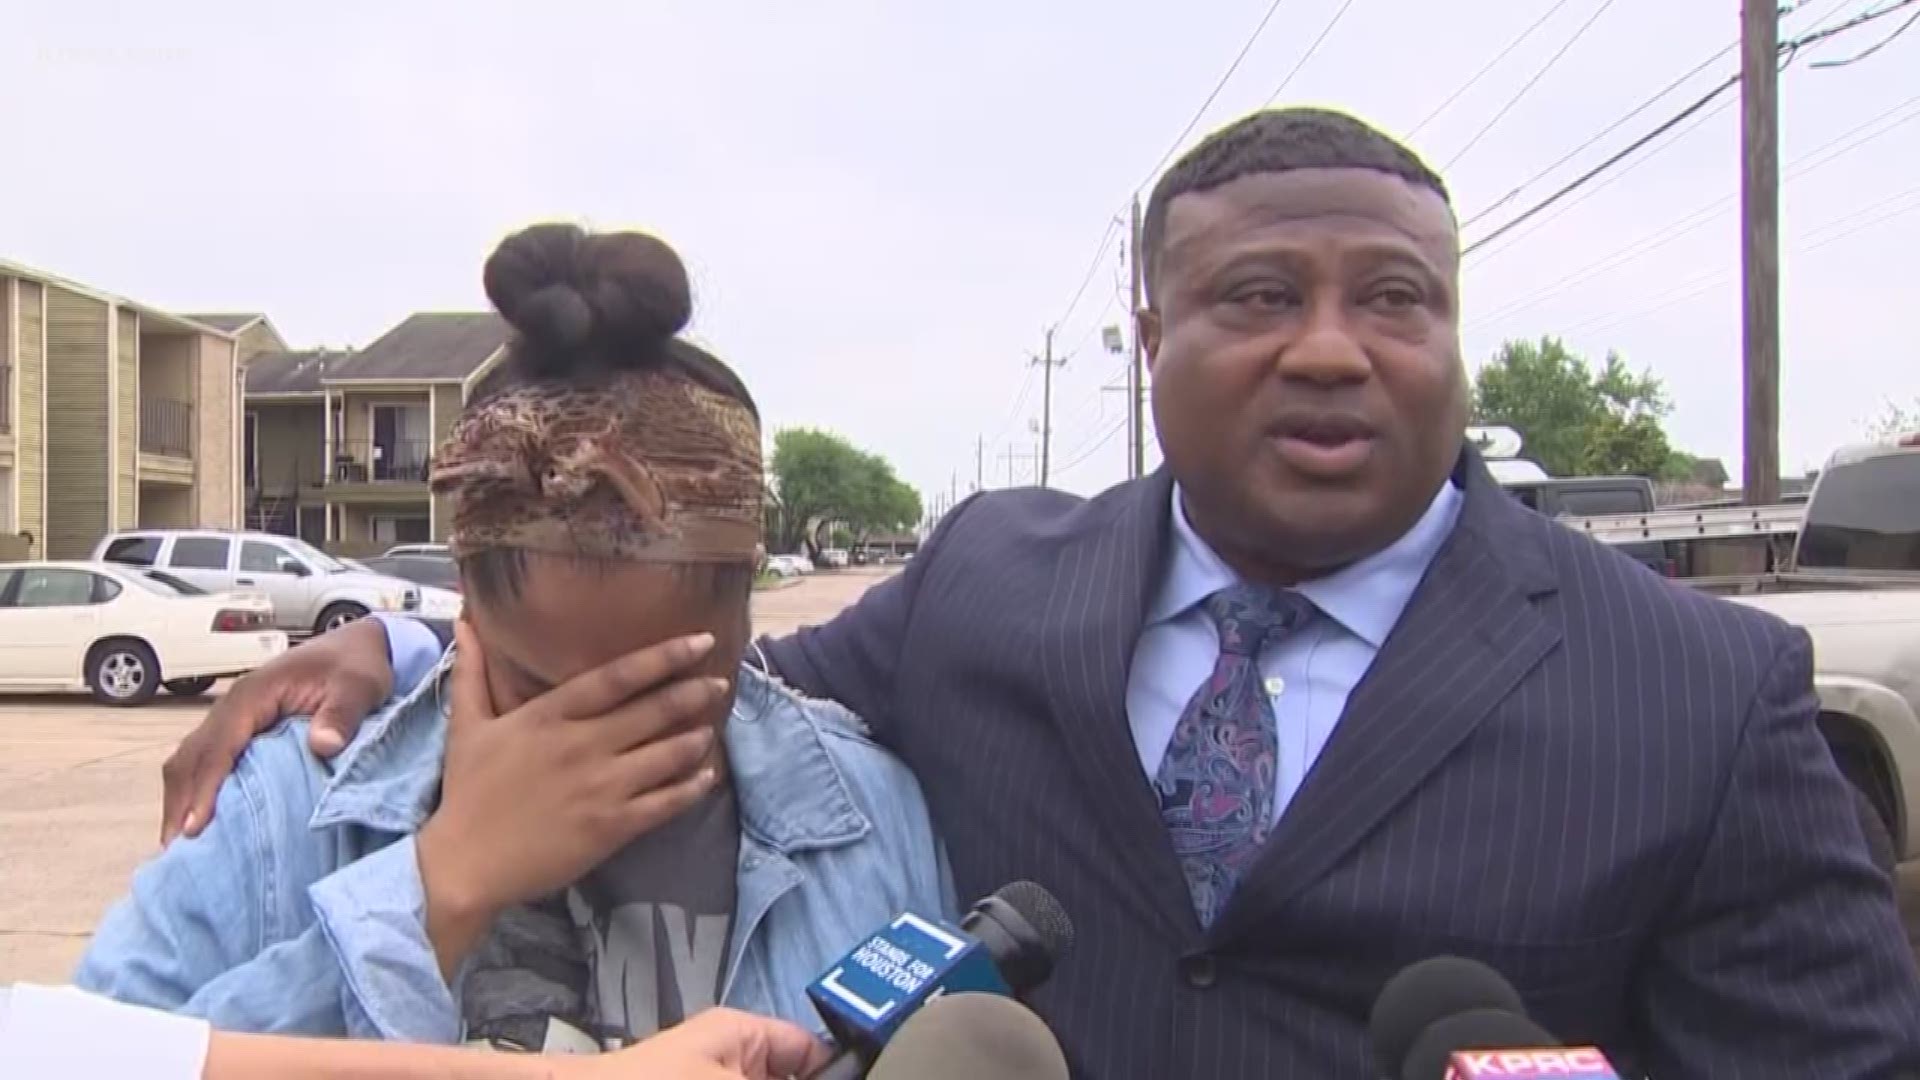 On behalf of Brittany Bowens, local activist Quanell X made explosive new claims about the disappearance of Bowens' 4-year-old daughter Maleah Davis.